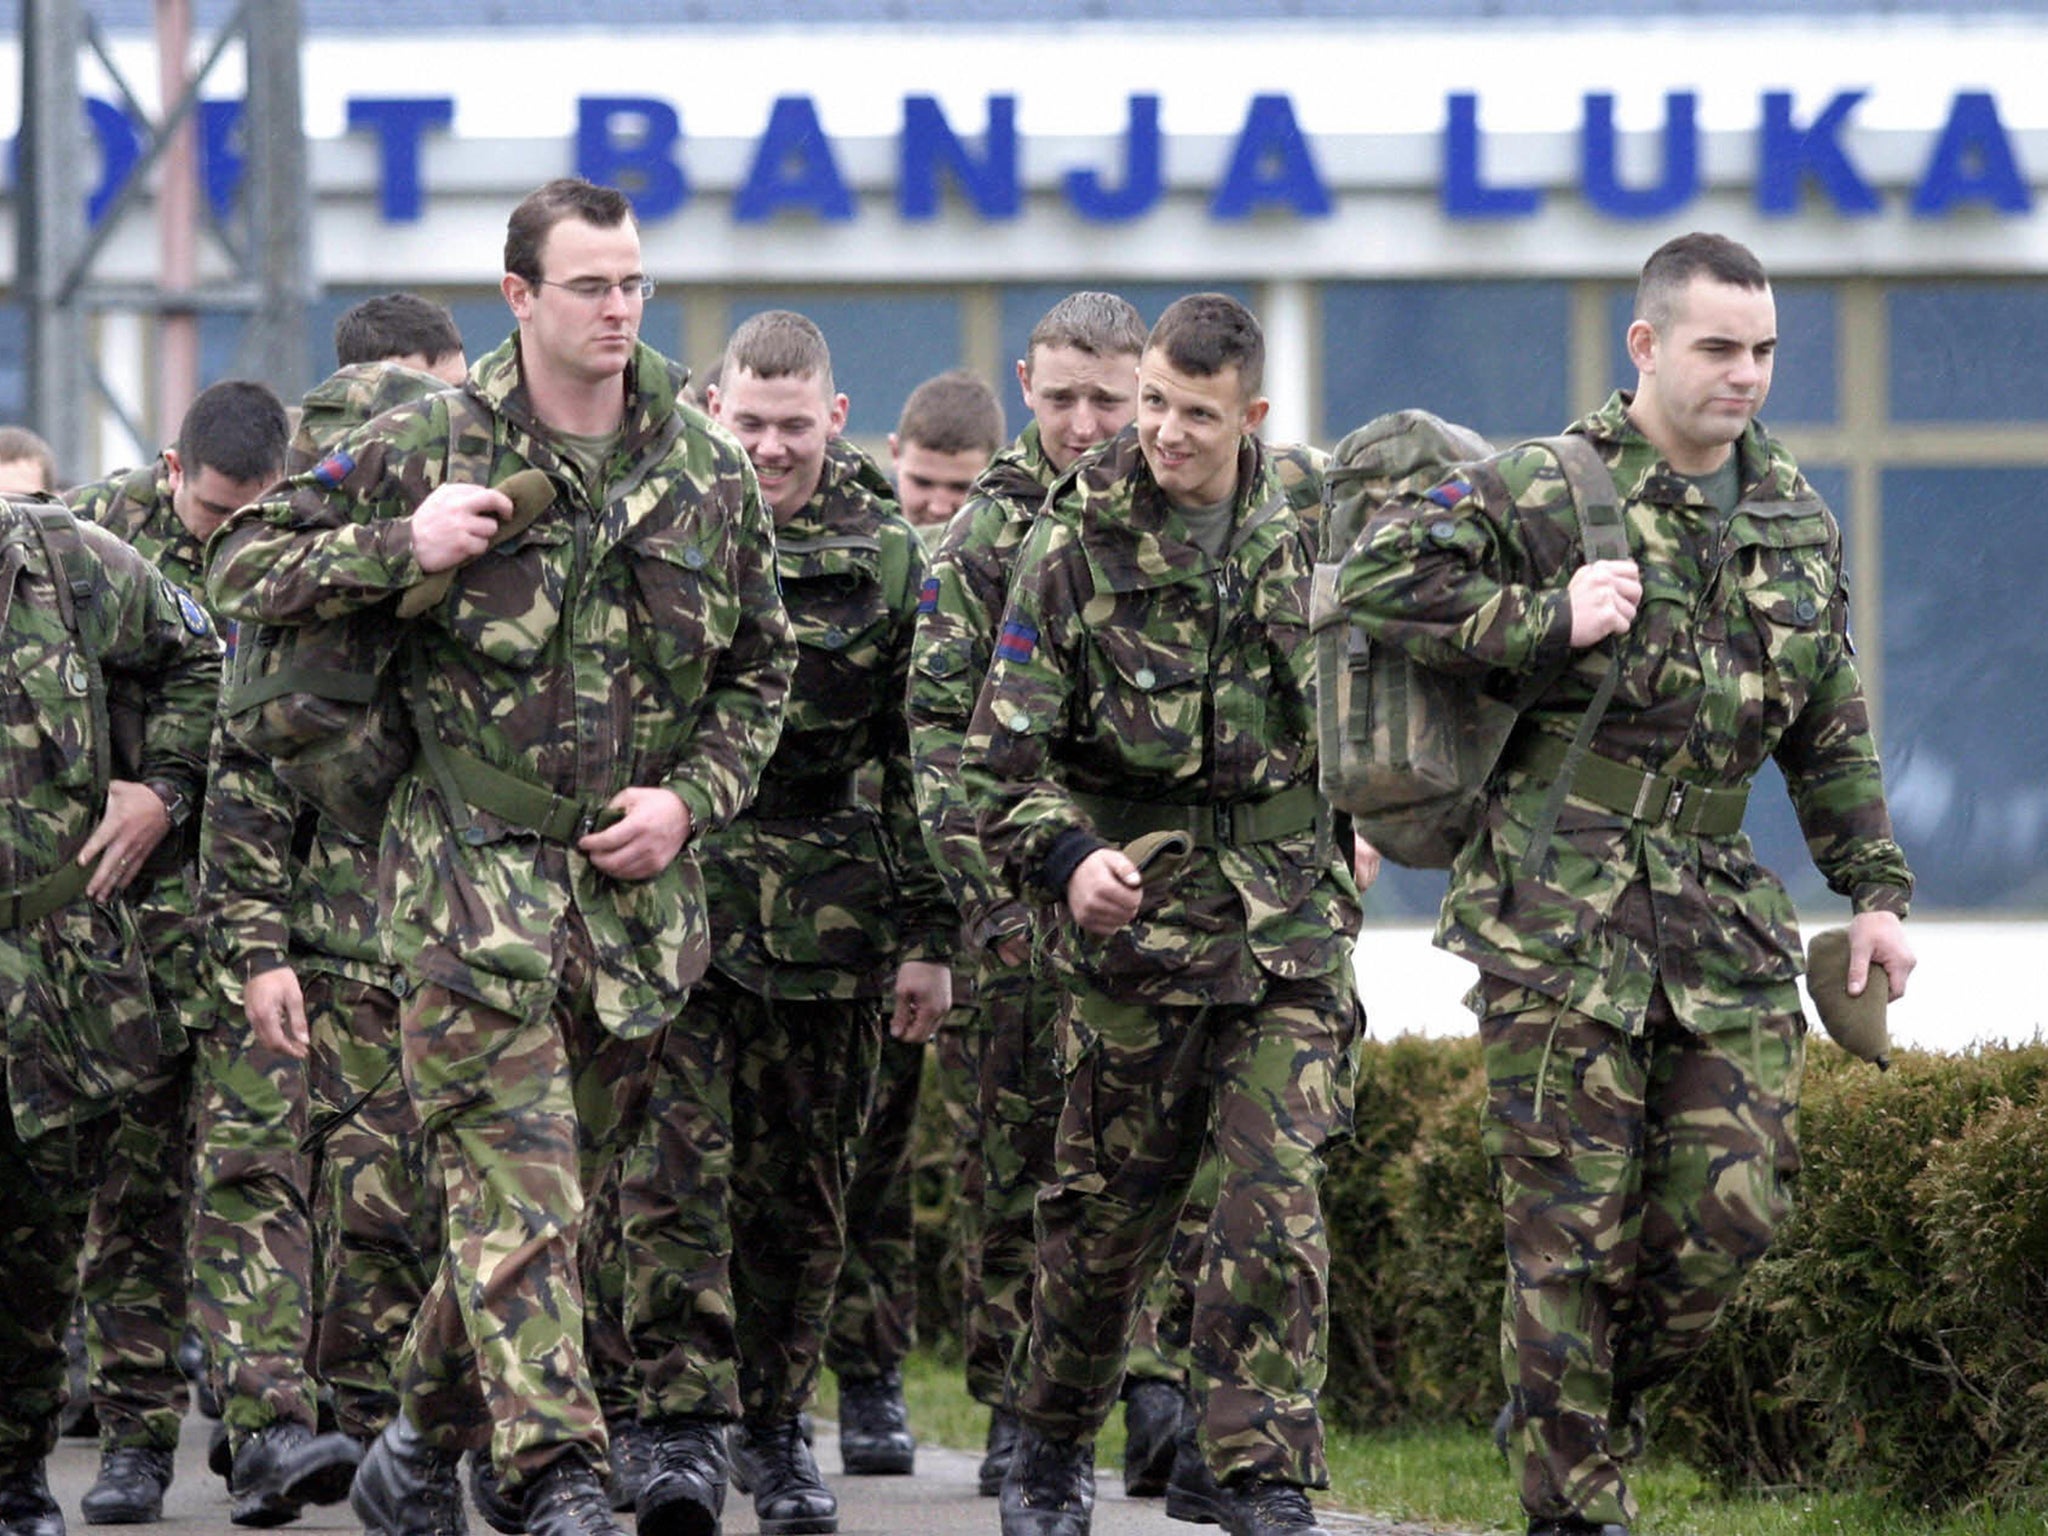 The first contingent of British soldiers, members of the EU peacekeeping mission in Bosnia and Herzegovina, depart from the Banja Luka International in 2007, after 15 years of helping to keep the peace in the country